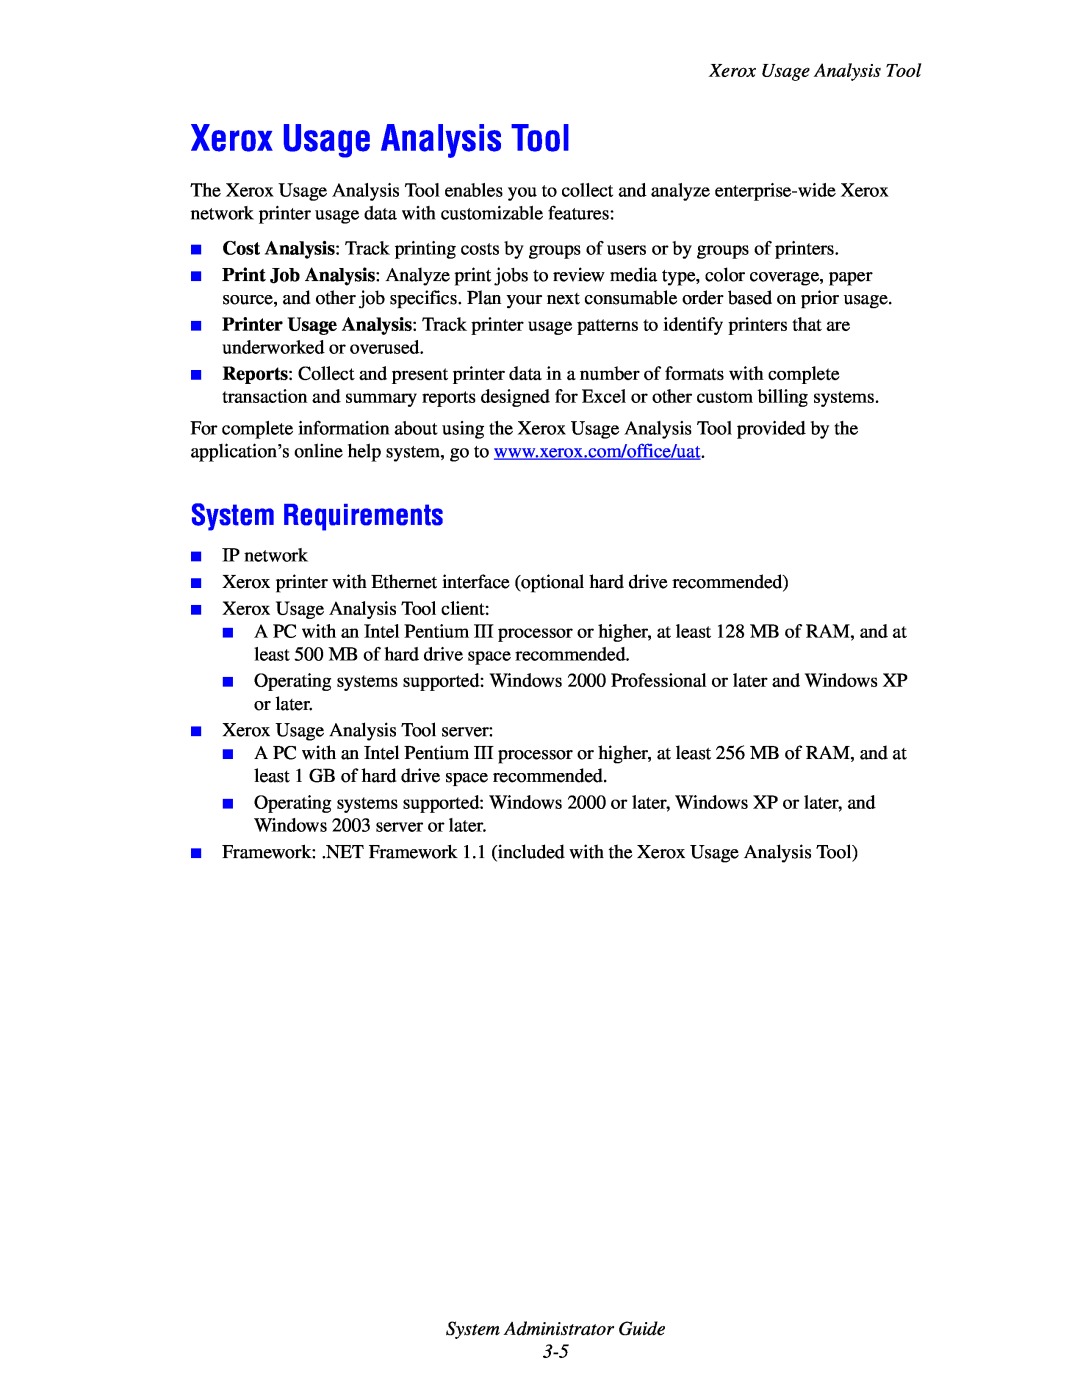 Xerox 6300, 6350, 8500, 8550 manual Xerox Usage Analysis Tool, System Requirements, System Administrator Guide 3-5 